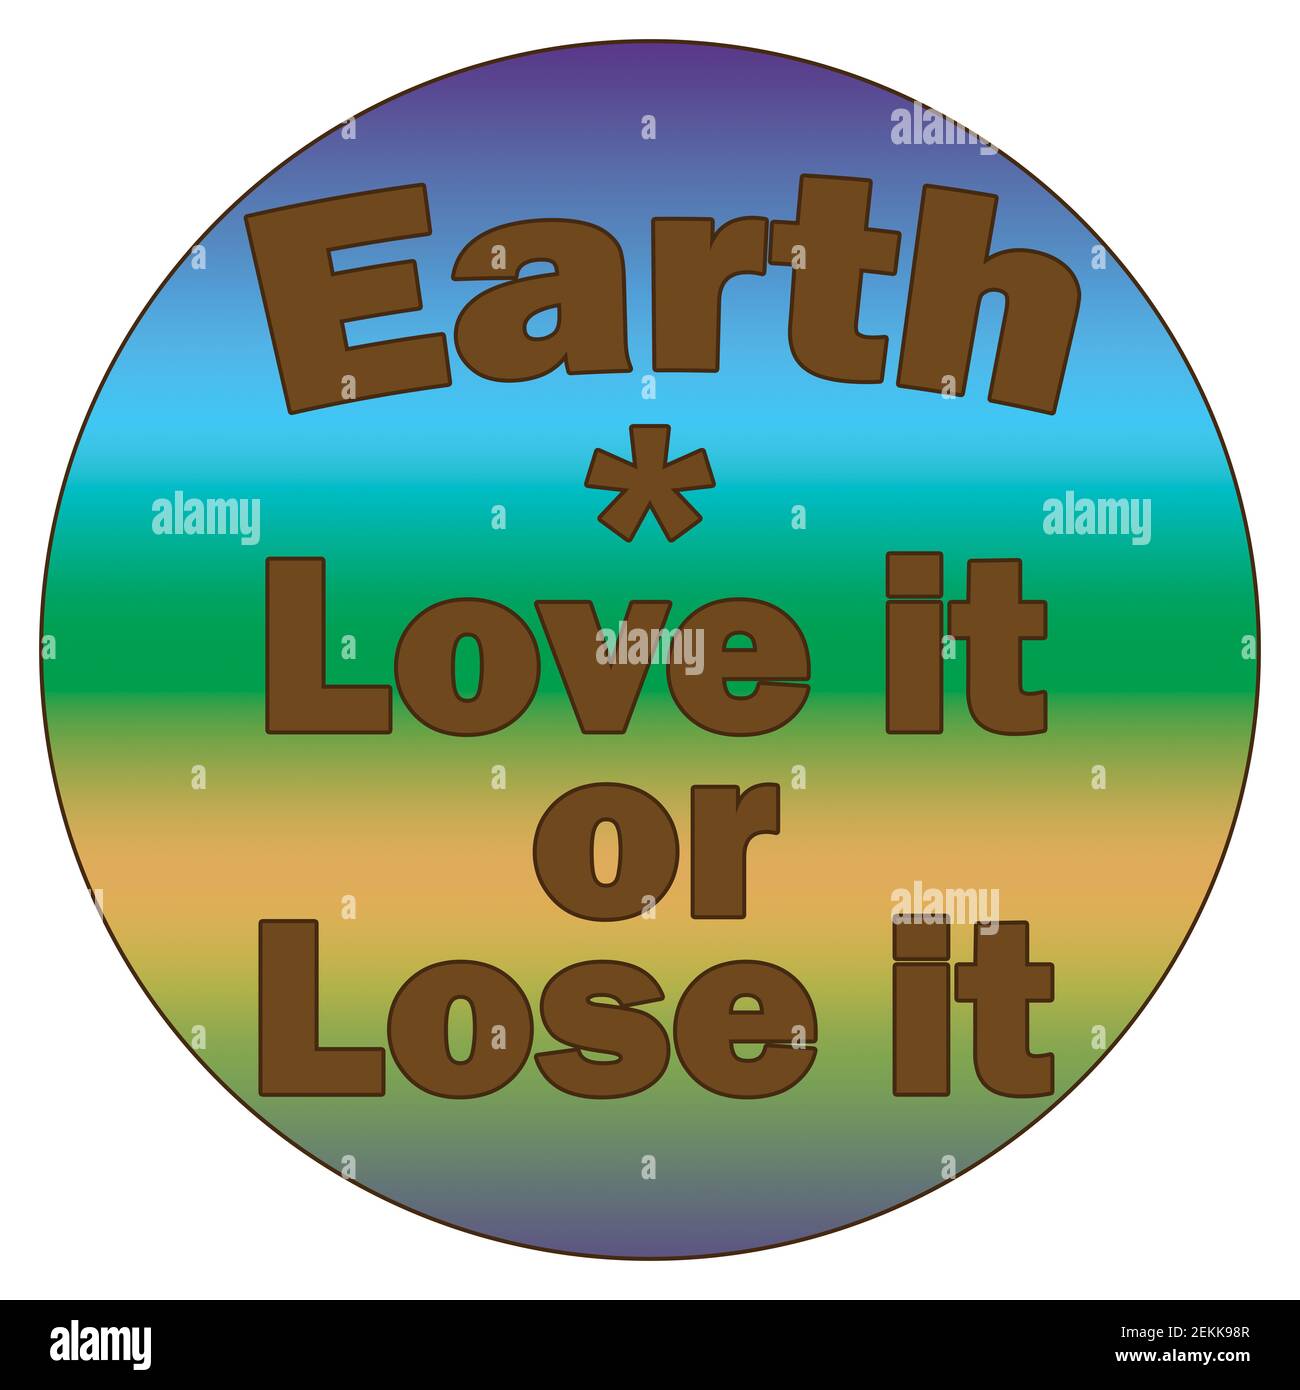 Earth - Love it of Lose it Word Illustration Stock Photo